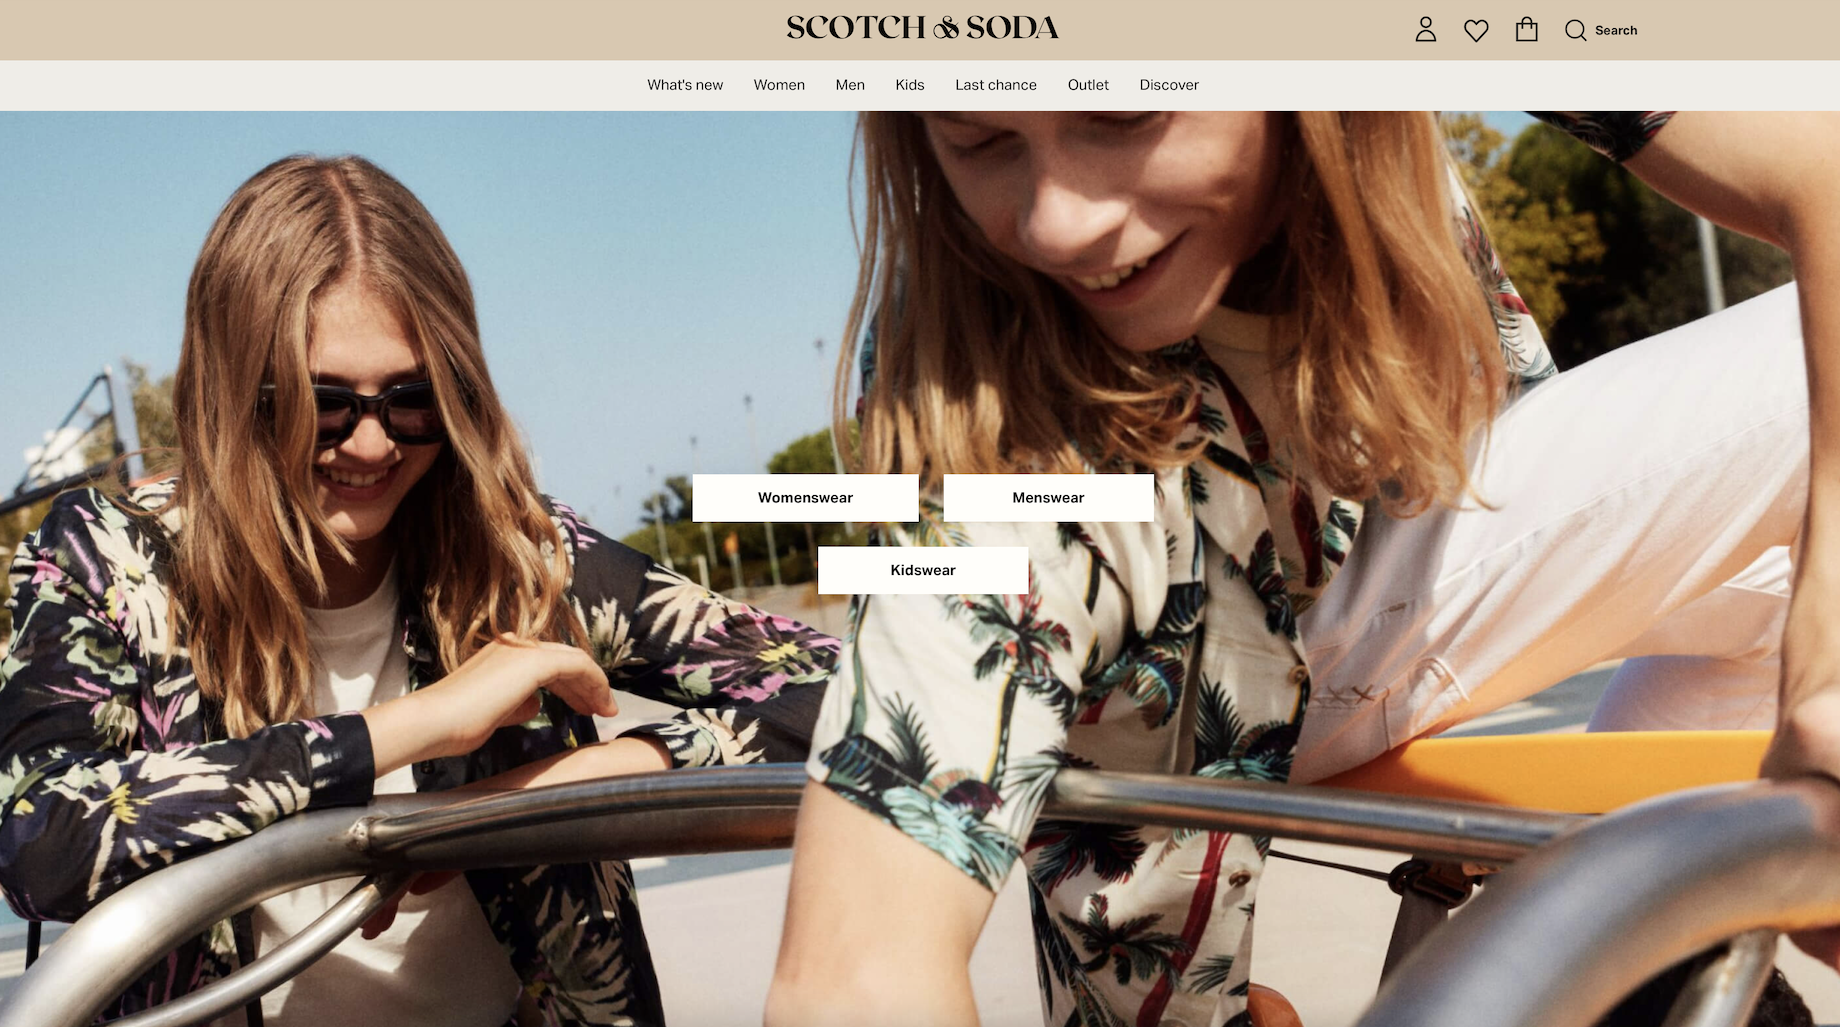 The Dutch Company Scotch & Soda Filed for Bankruptcy, Overseas Operations Will Continue